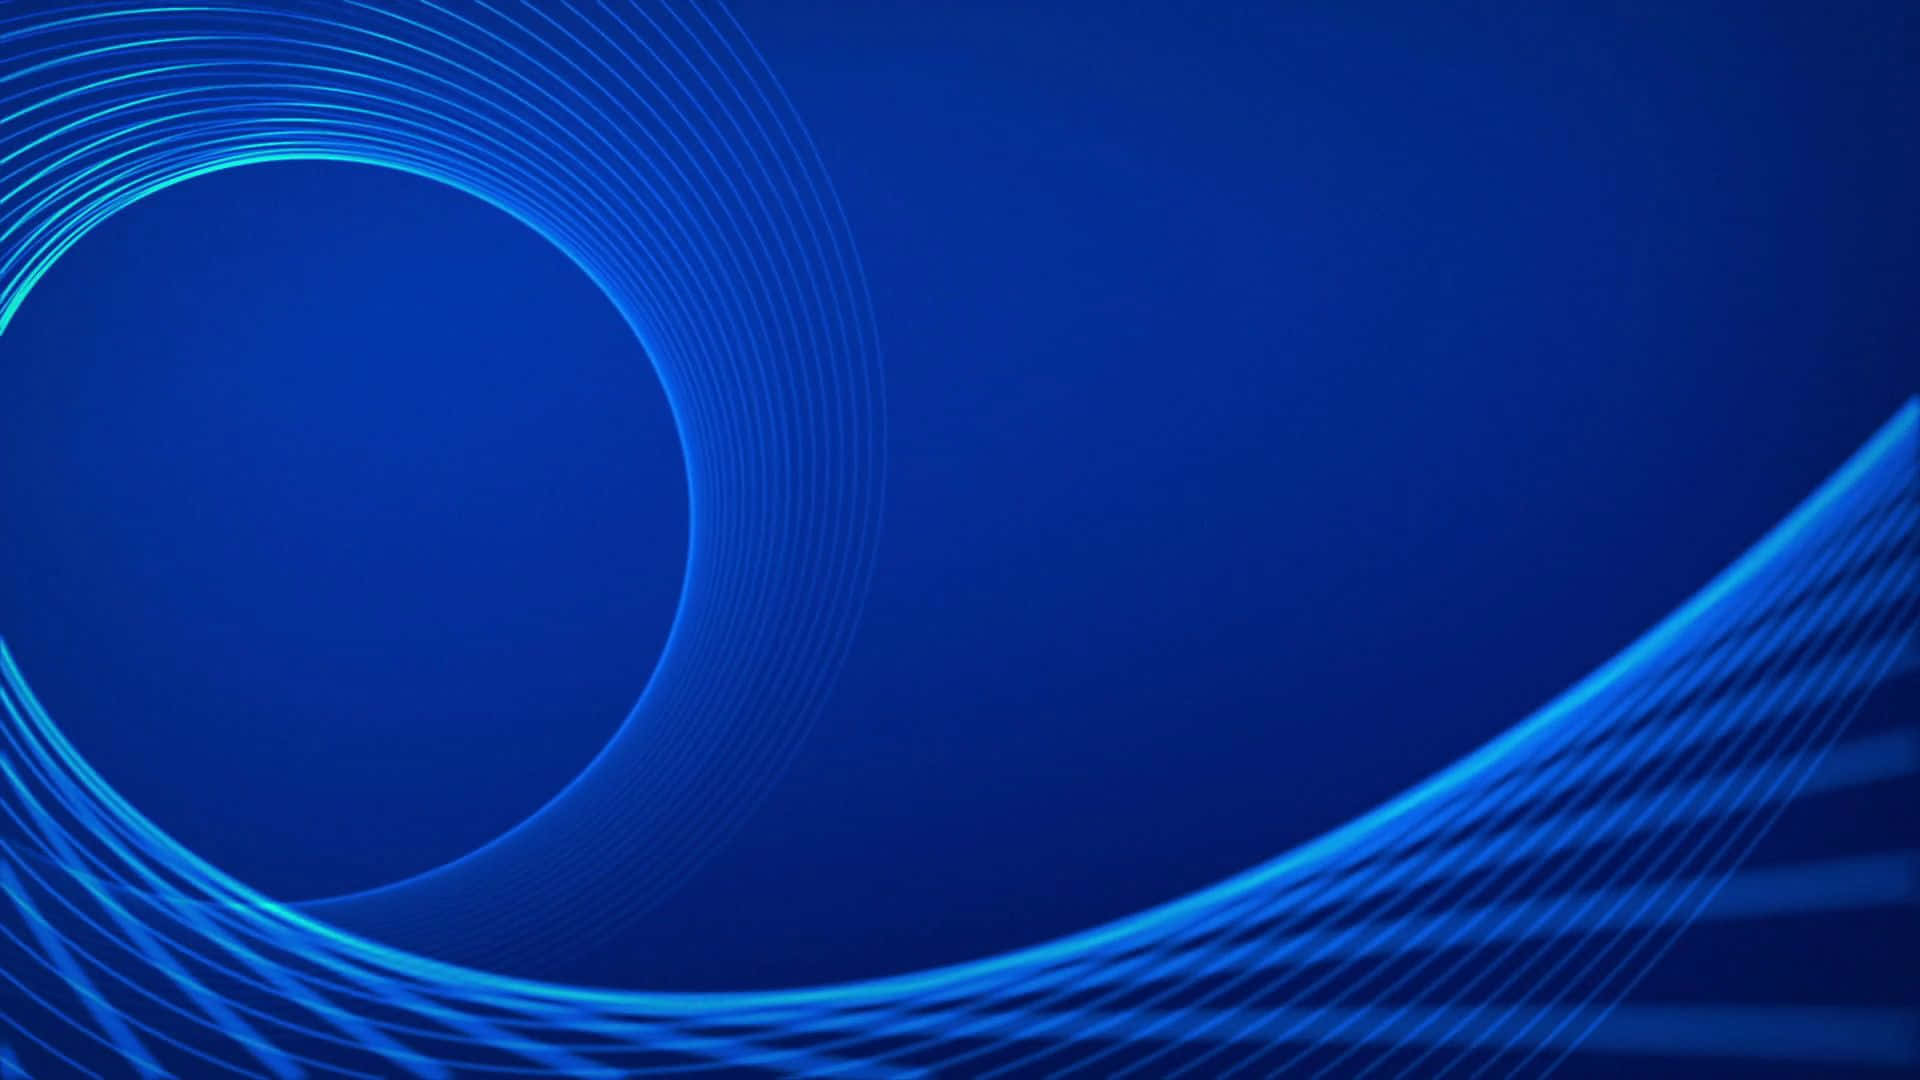 A Blue Background With A Circular Shape